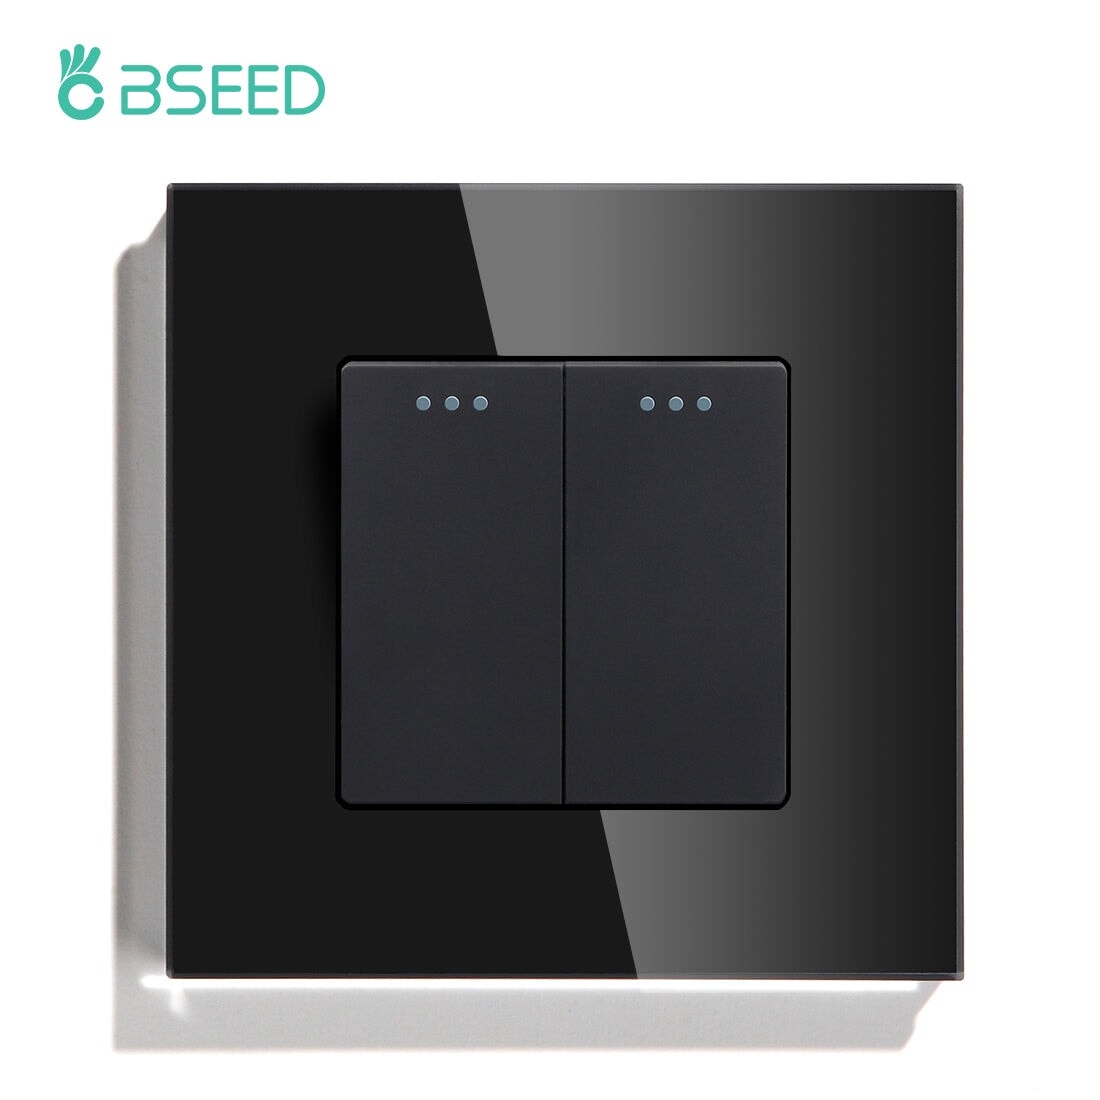 BSEED Wall Switches Automatic Rebound 1/2Gang 1Way Glass Mechanical Light Switches Reset Switches Return to Initial Position Light Switches Bseedswitch Black 2Gang 